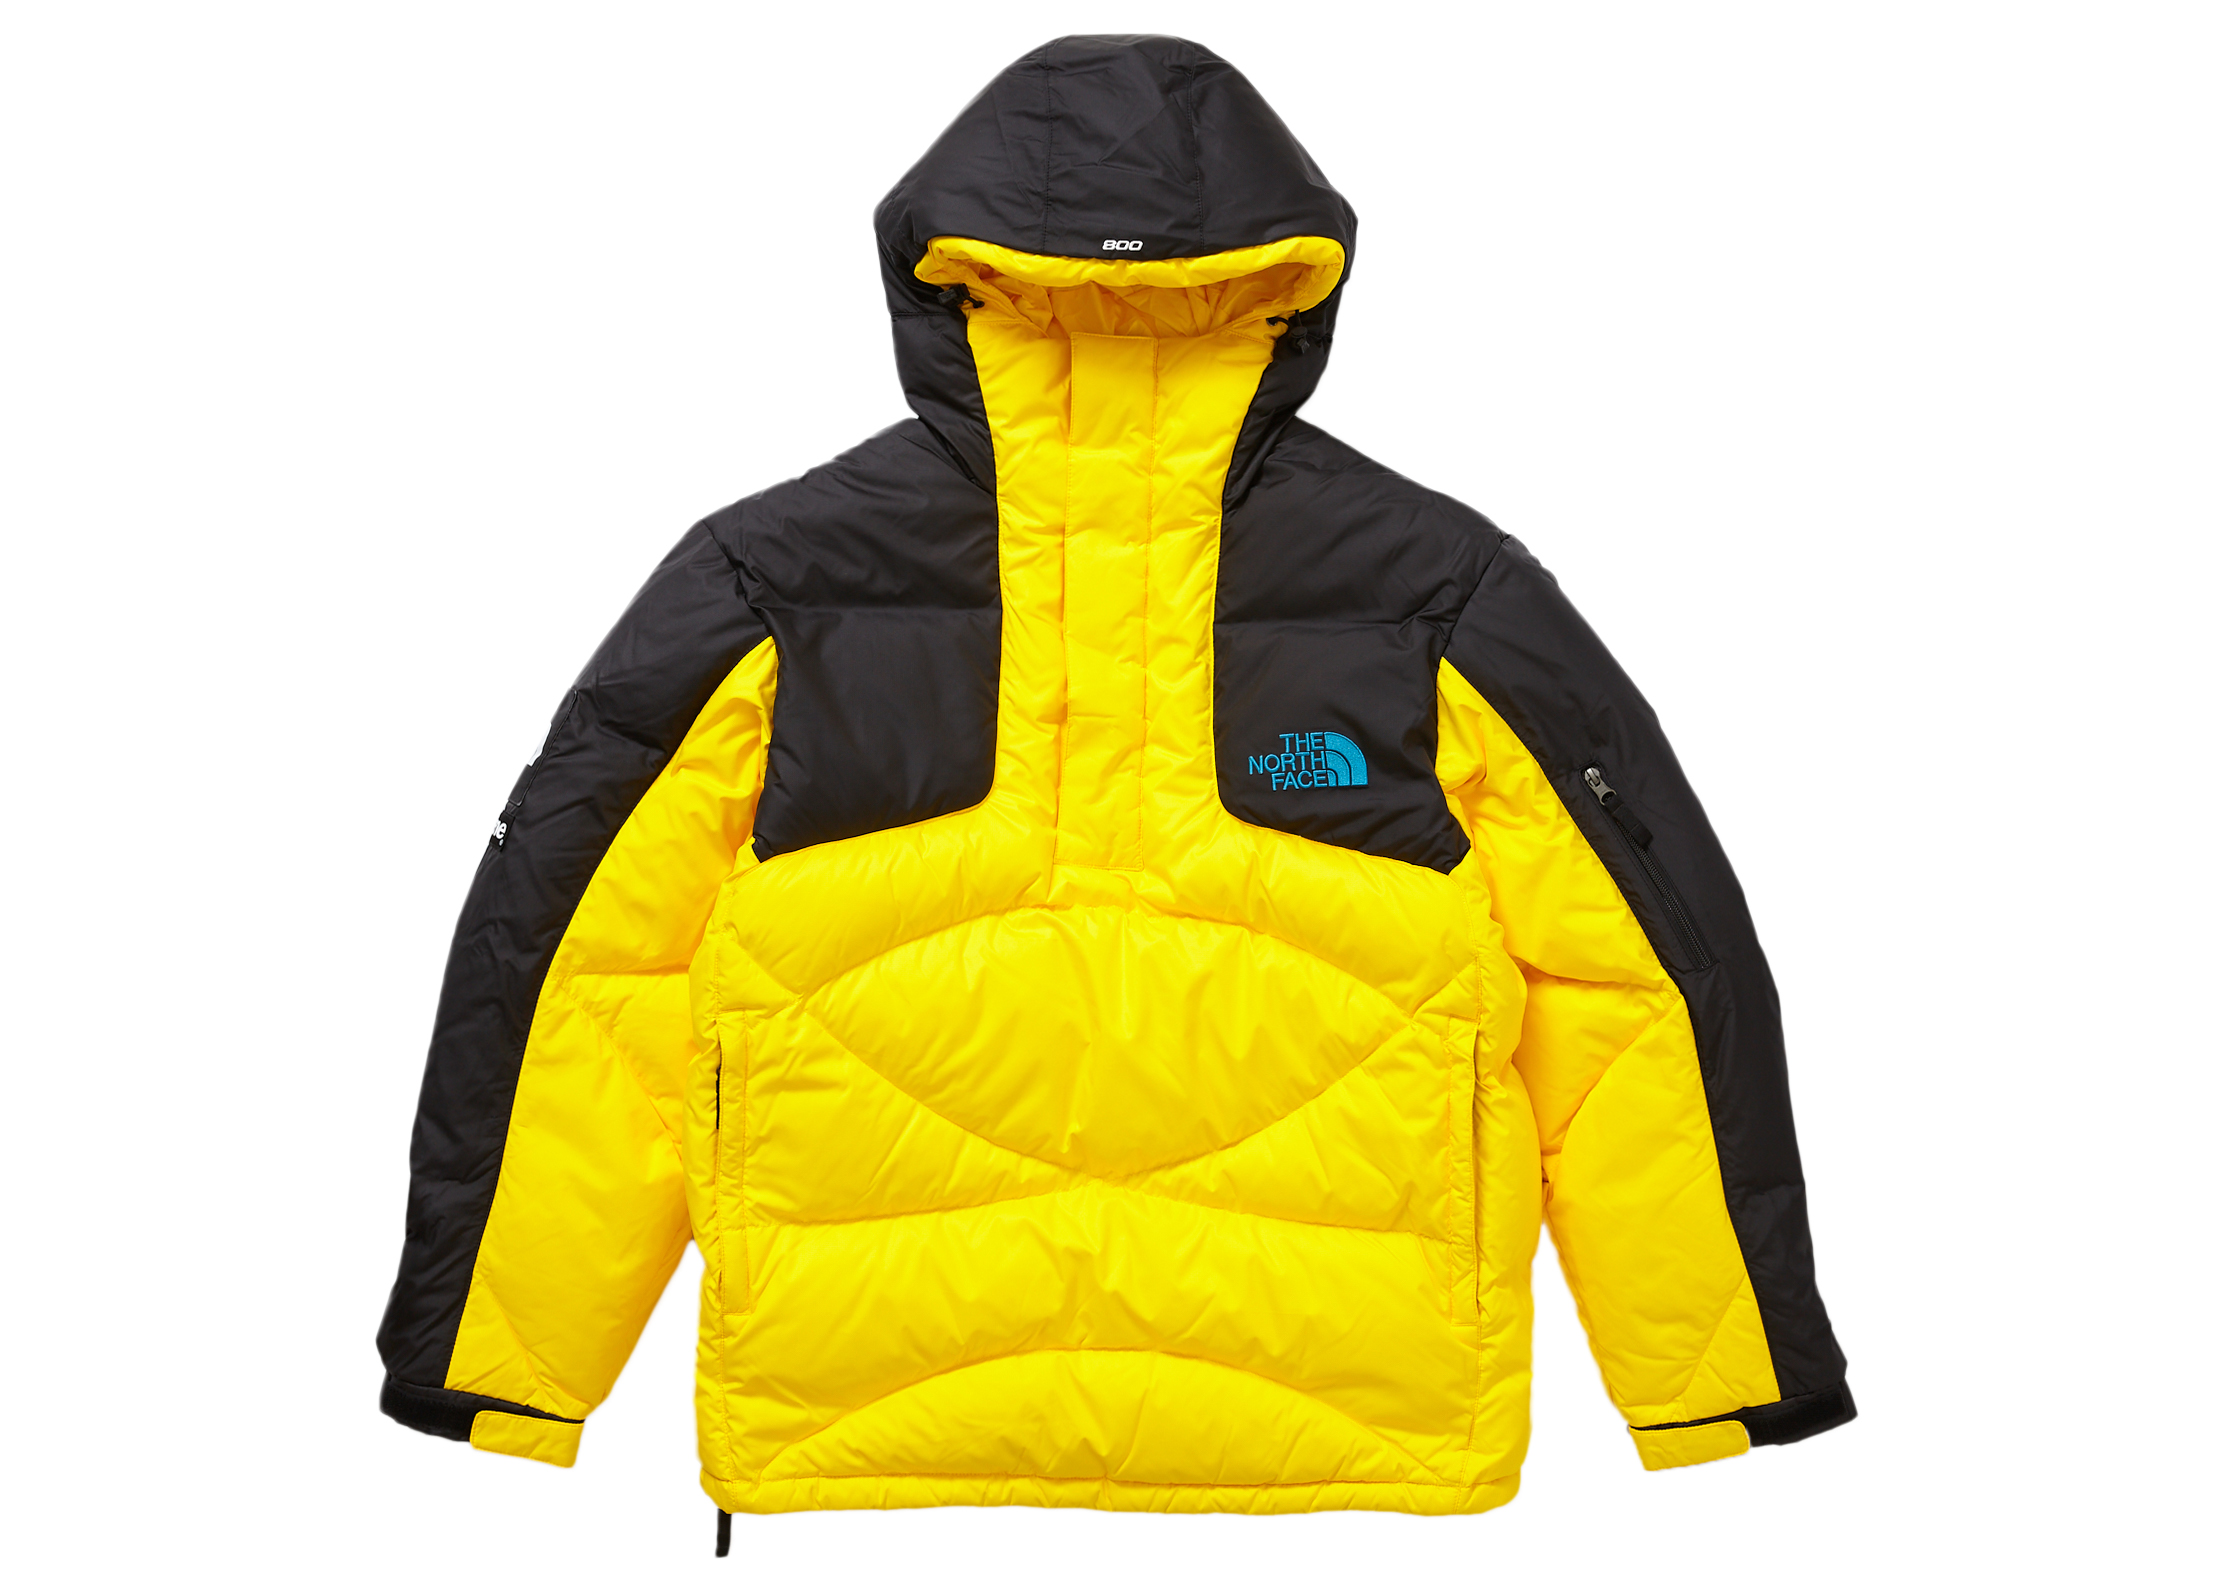 Supreme The North Face 800-Fill Half Zipお値段変更しました